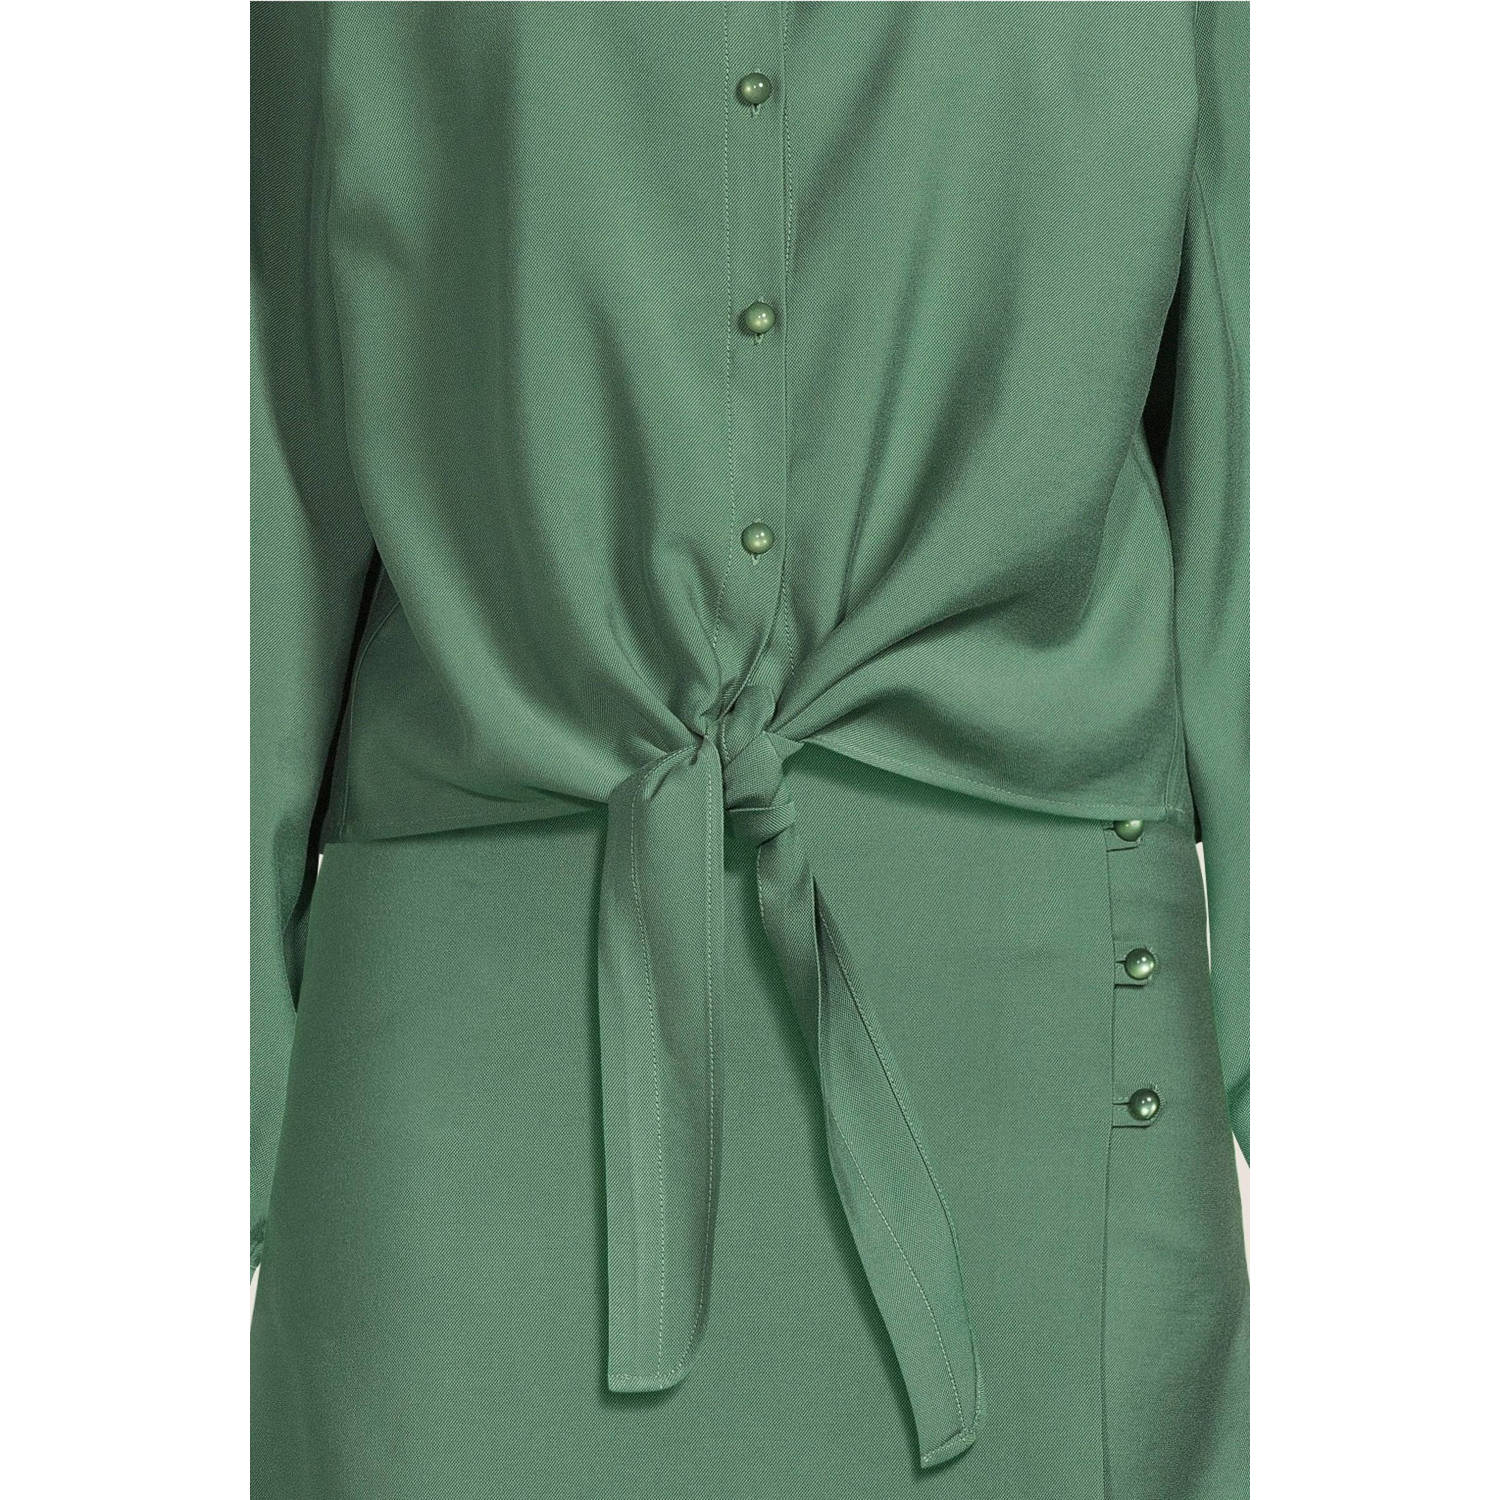 Another-Label blouse groen